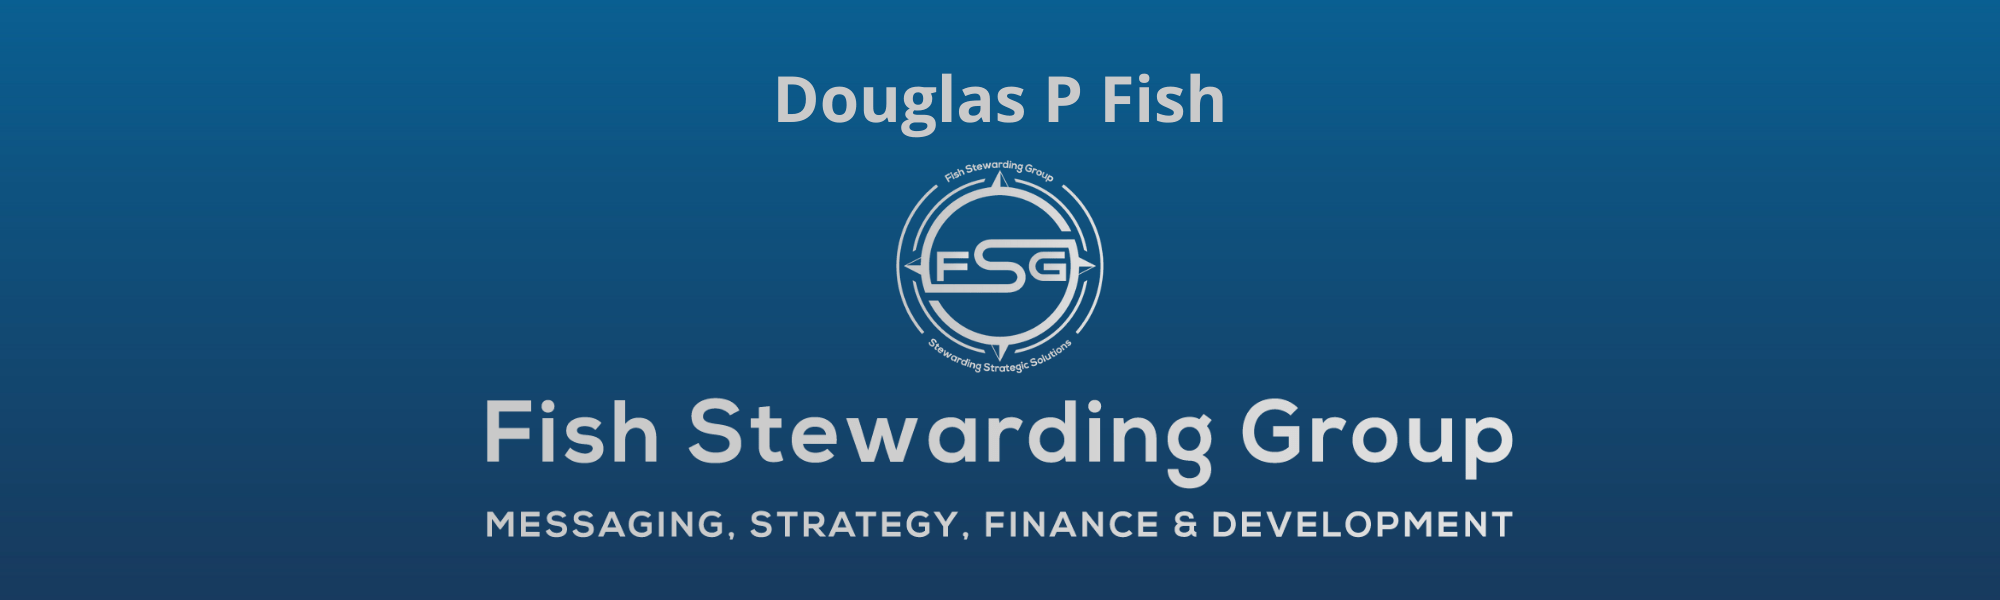 A thin rectangular Footer graphic for the Douglas P Fish page. The background is a blue gradient color that goes from a dark blue on the bottom to a lighter blue on top. The text in gray on top reads Douglas P Fish and FAQs. The text in gray on the bottom center reads: Fish Stewarding Group and beneath that, the text reads Messaging, Strategy, Finance and Development. In the center above the text is the FSG logo in gray. The logo has the letters FSG in the middle with a circle with four pointed arrows facing north, south, east and west with the S connected to that circle. Four rounded lines make the next circle of the circle and the last layer is a thin circle with the text on the Bottom that reads Stewarding Strategist Solutions and on top, the text reads Fish Stewarding Group.